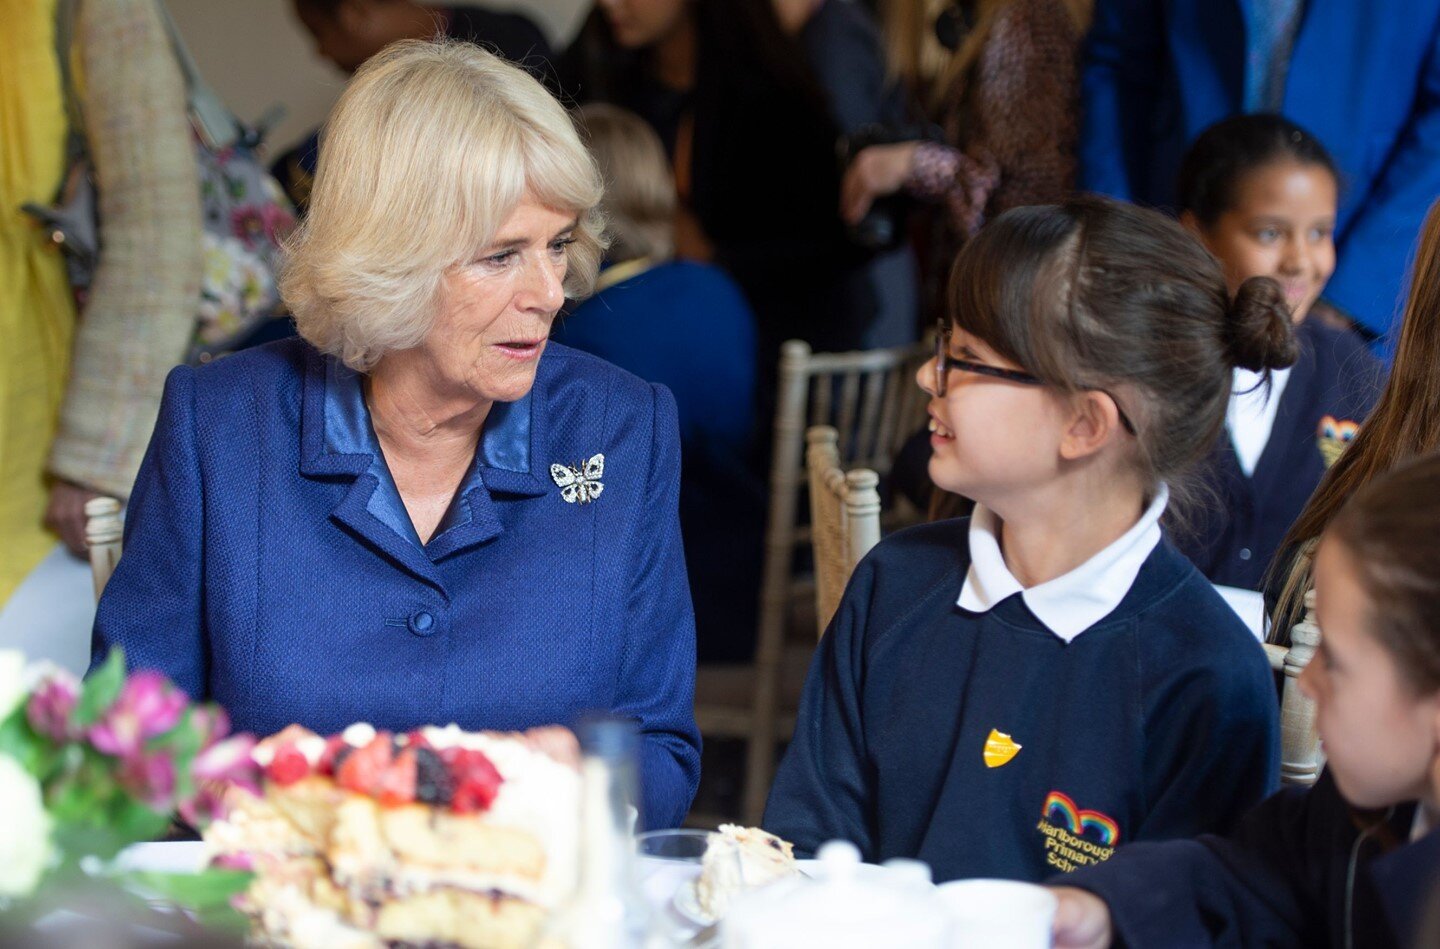 Make #PoetryTogether2021 a day to remember on @nationalpoetryday by holding parties with other schools and care homes reciting poems by heart.

Her Royal Highness the Duchess of Cornwall, @clarencehouse, joined a number of schoolchildren and care hom